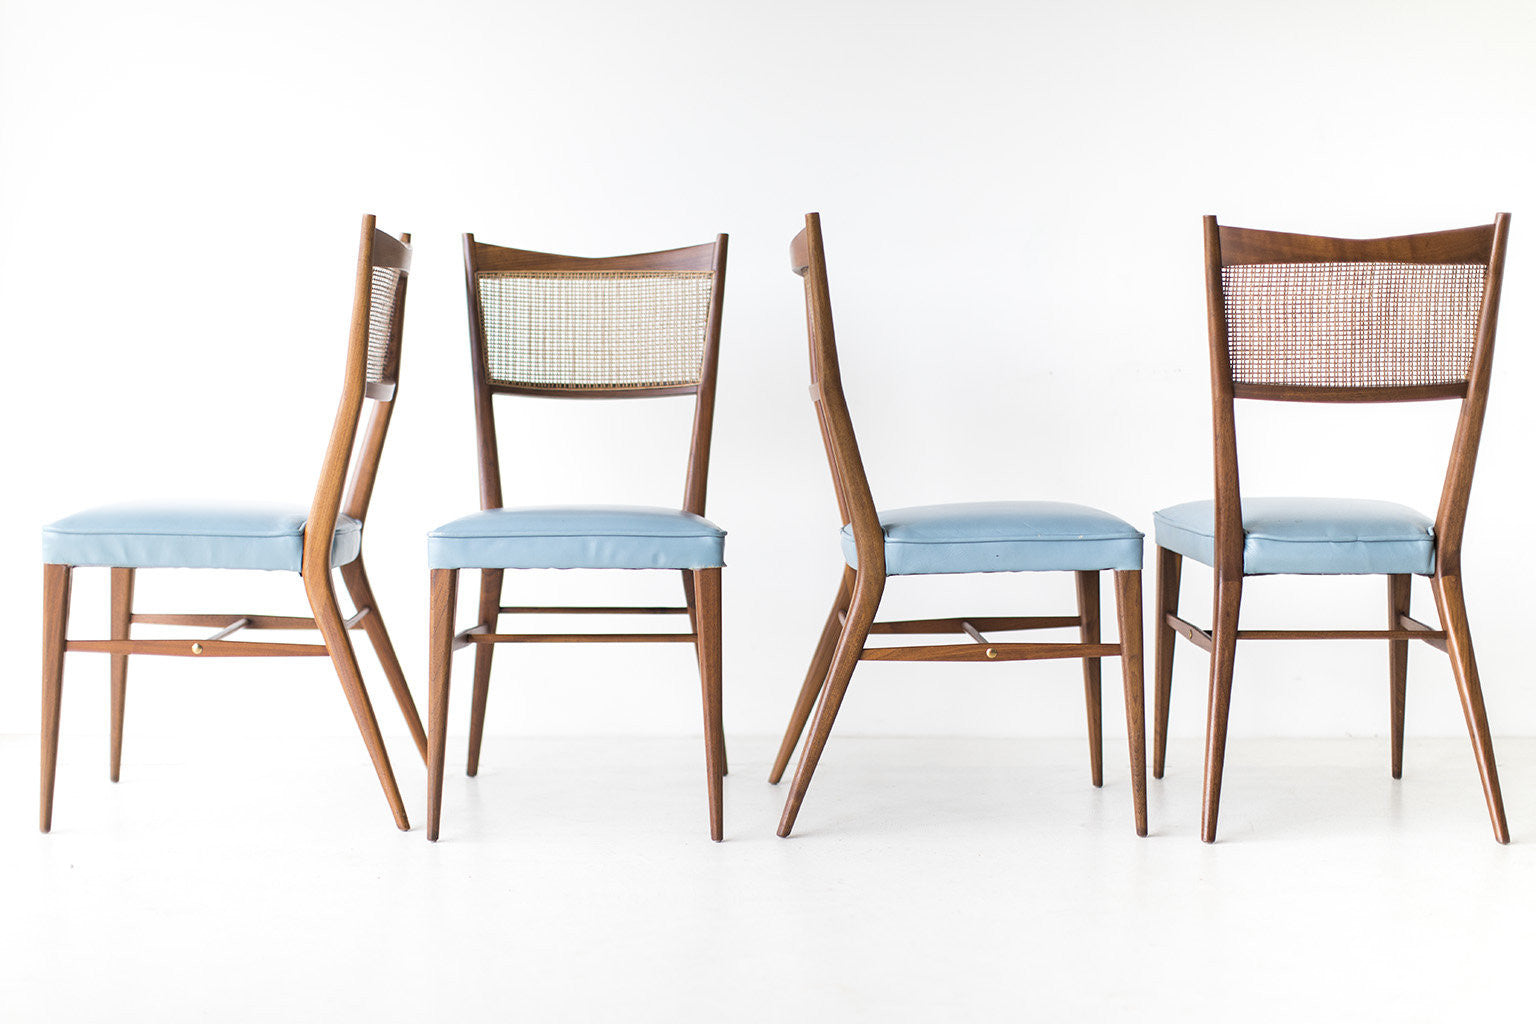 Paul-McCobb-Dining-Chairs-H-Sacks-Sons-Connoisseur-Collection-10